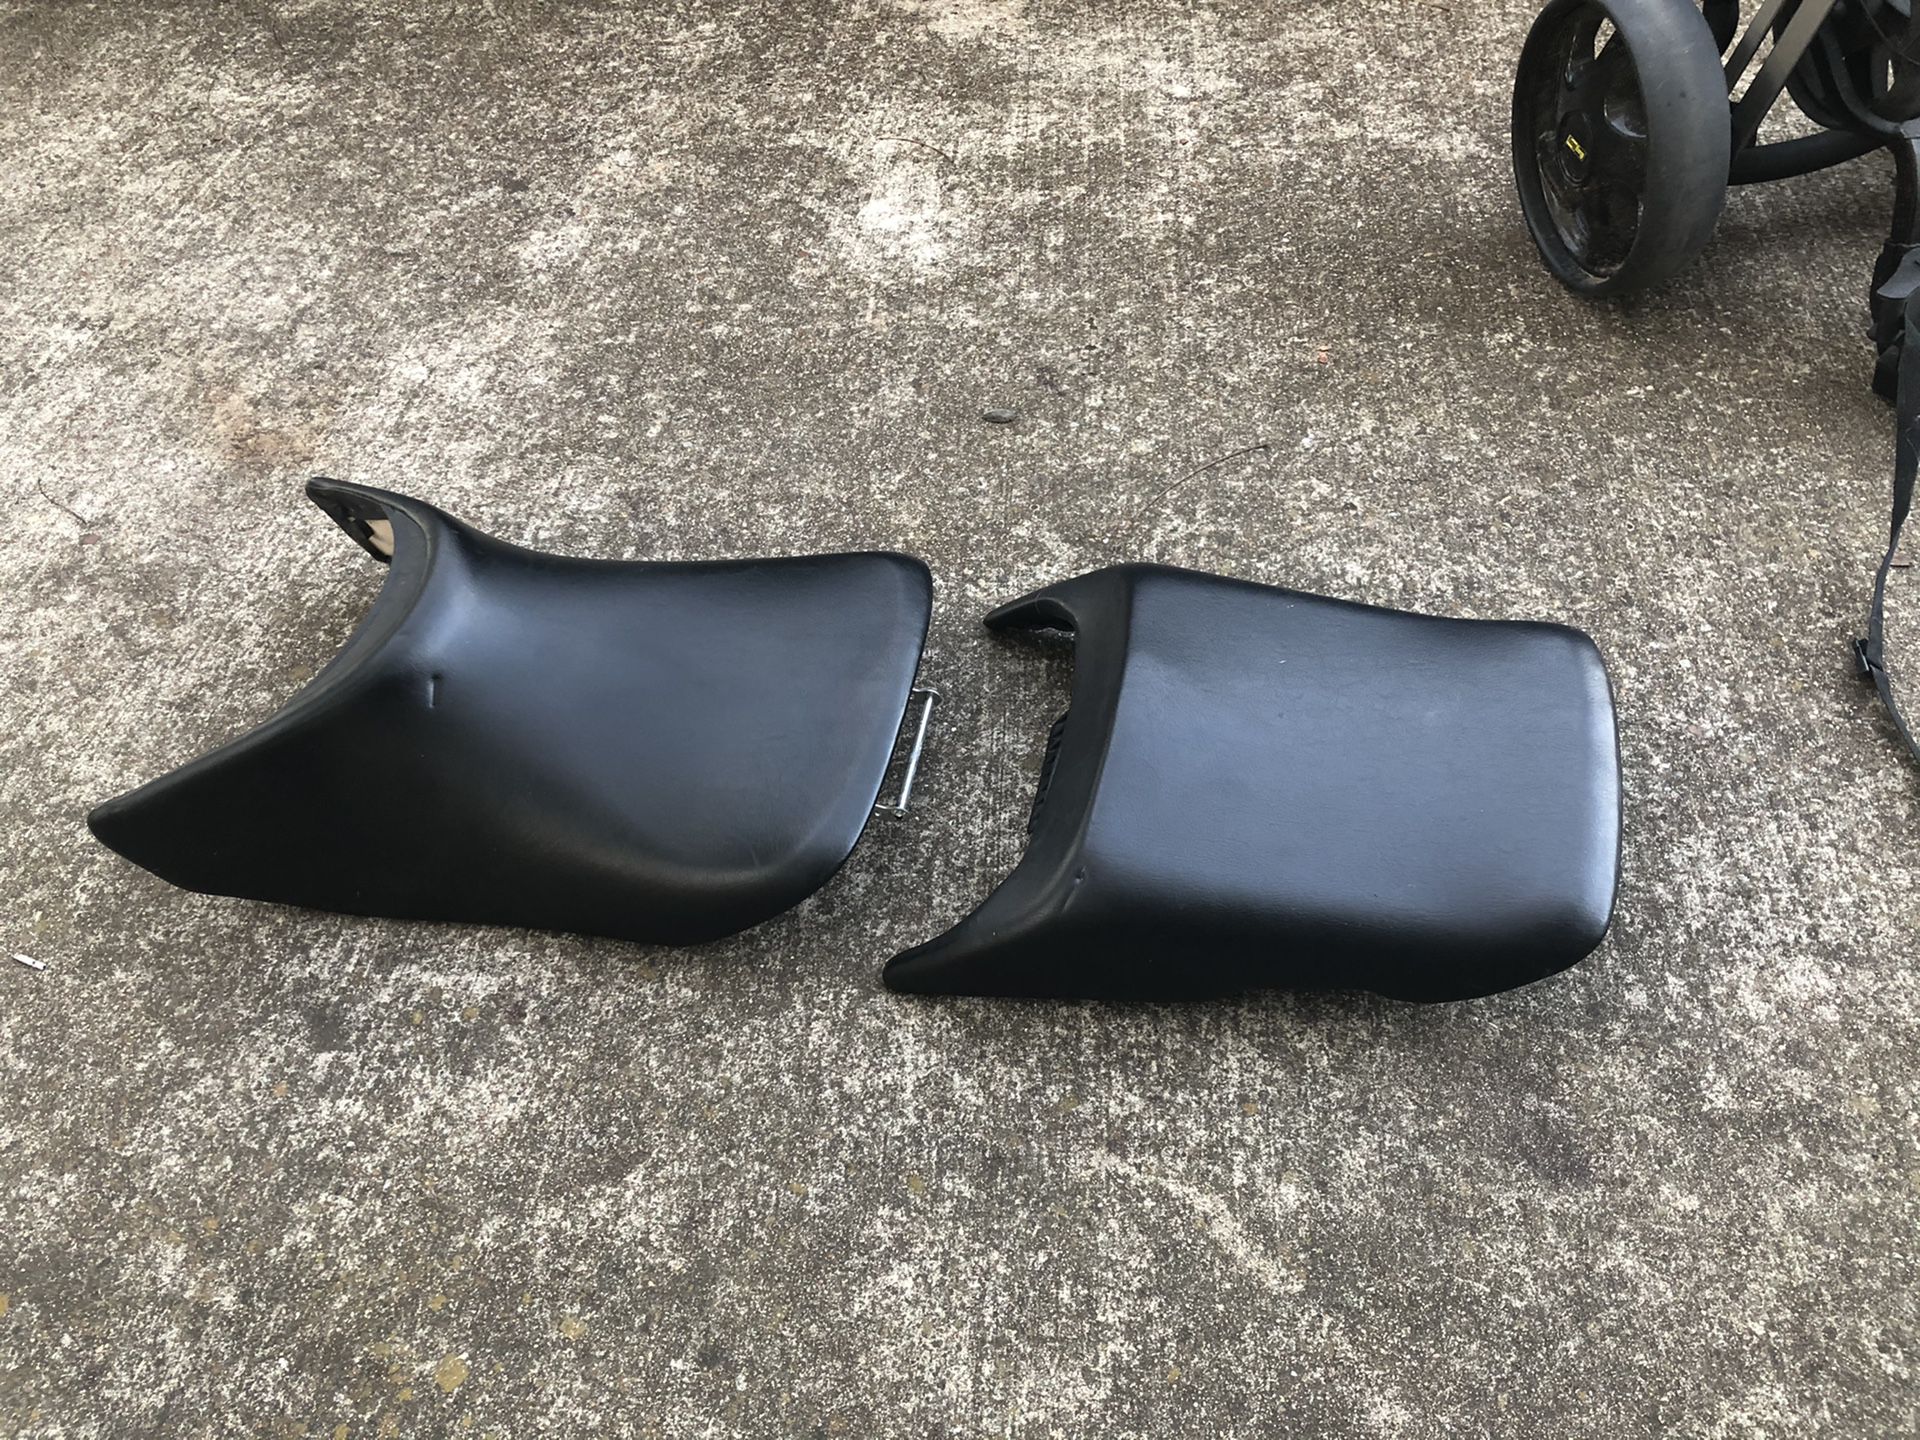 Honda motorcycle seat - ST1300 great condition!